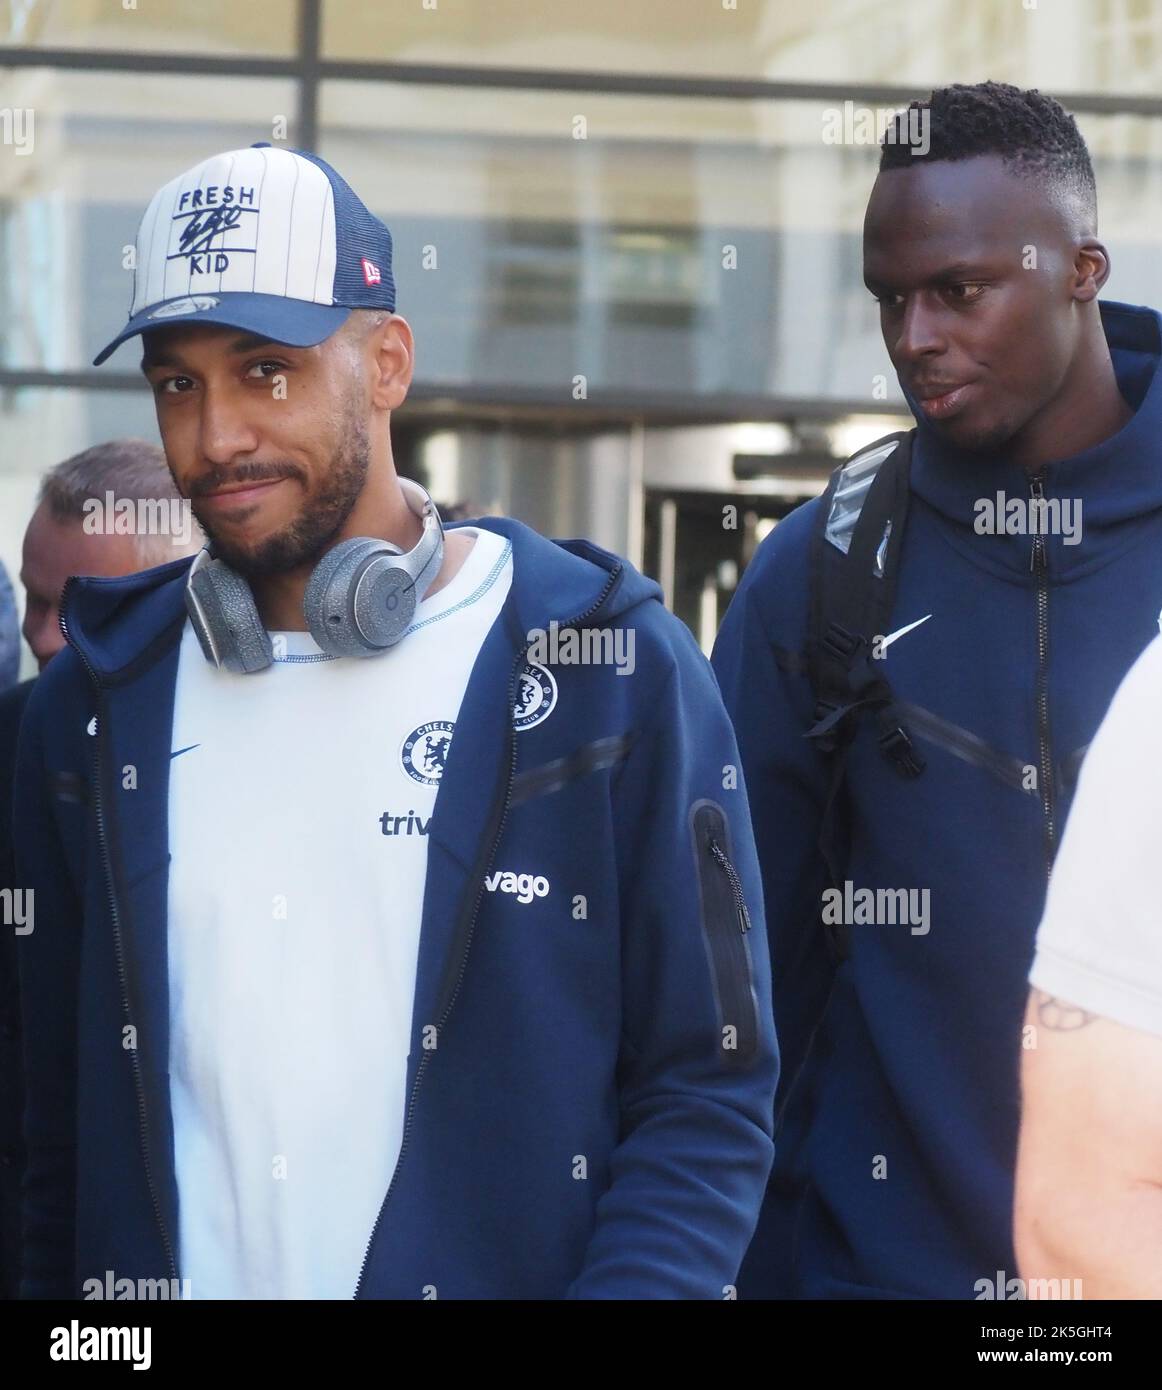 London, UK. 8th Oct, 2022. Chelsea FC players Aubameyaang and Mendy leave hotel before home game against Wolves. Credit: Brian Minkoff/Alamy Live News Stock Photo